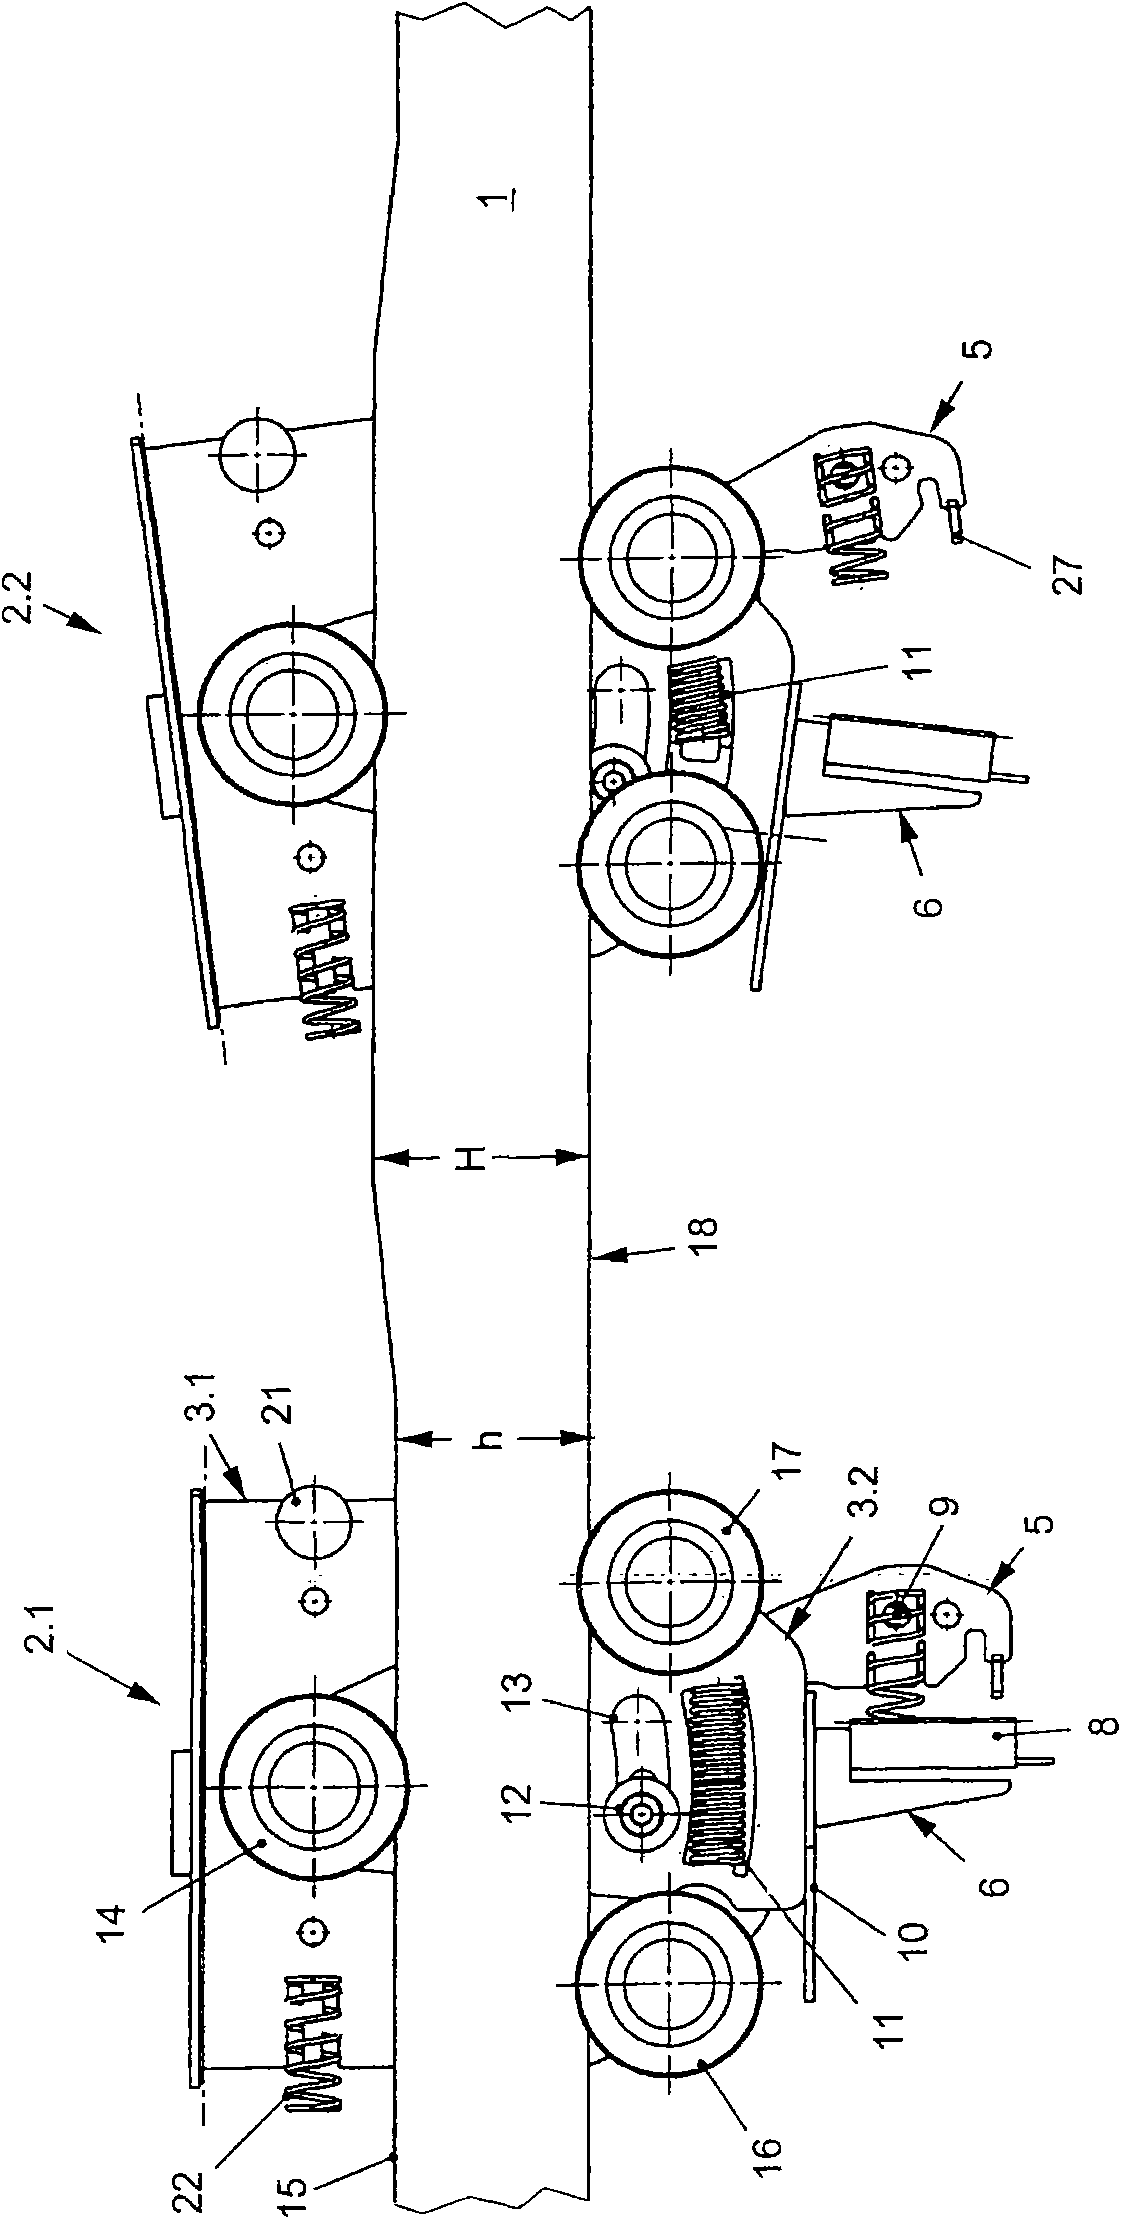 Method for conveying objects